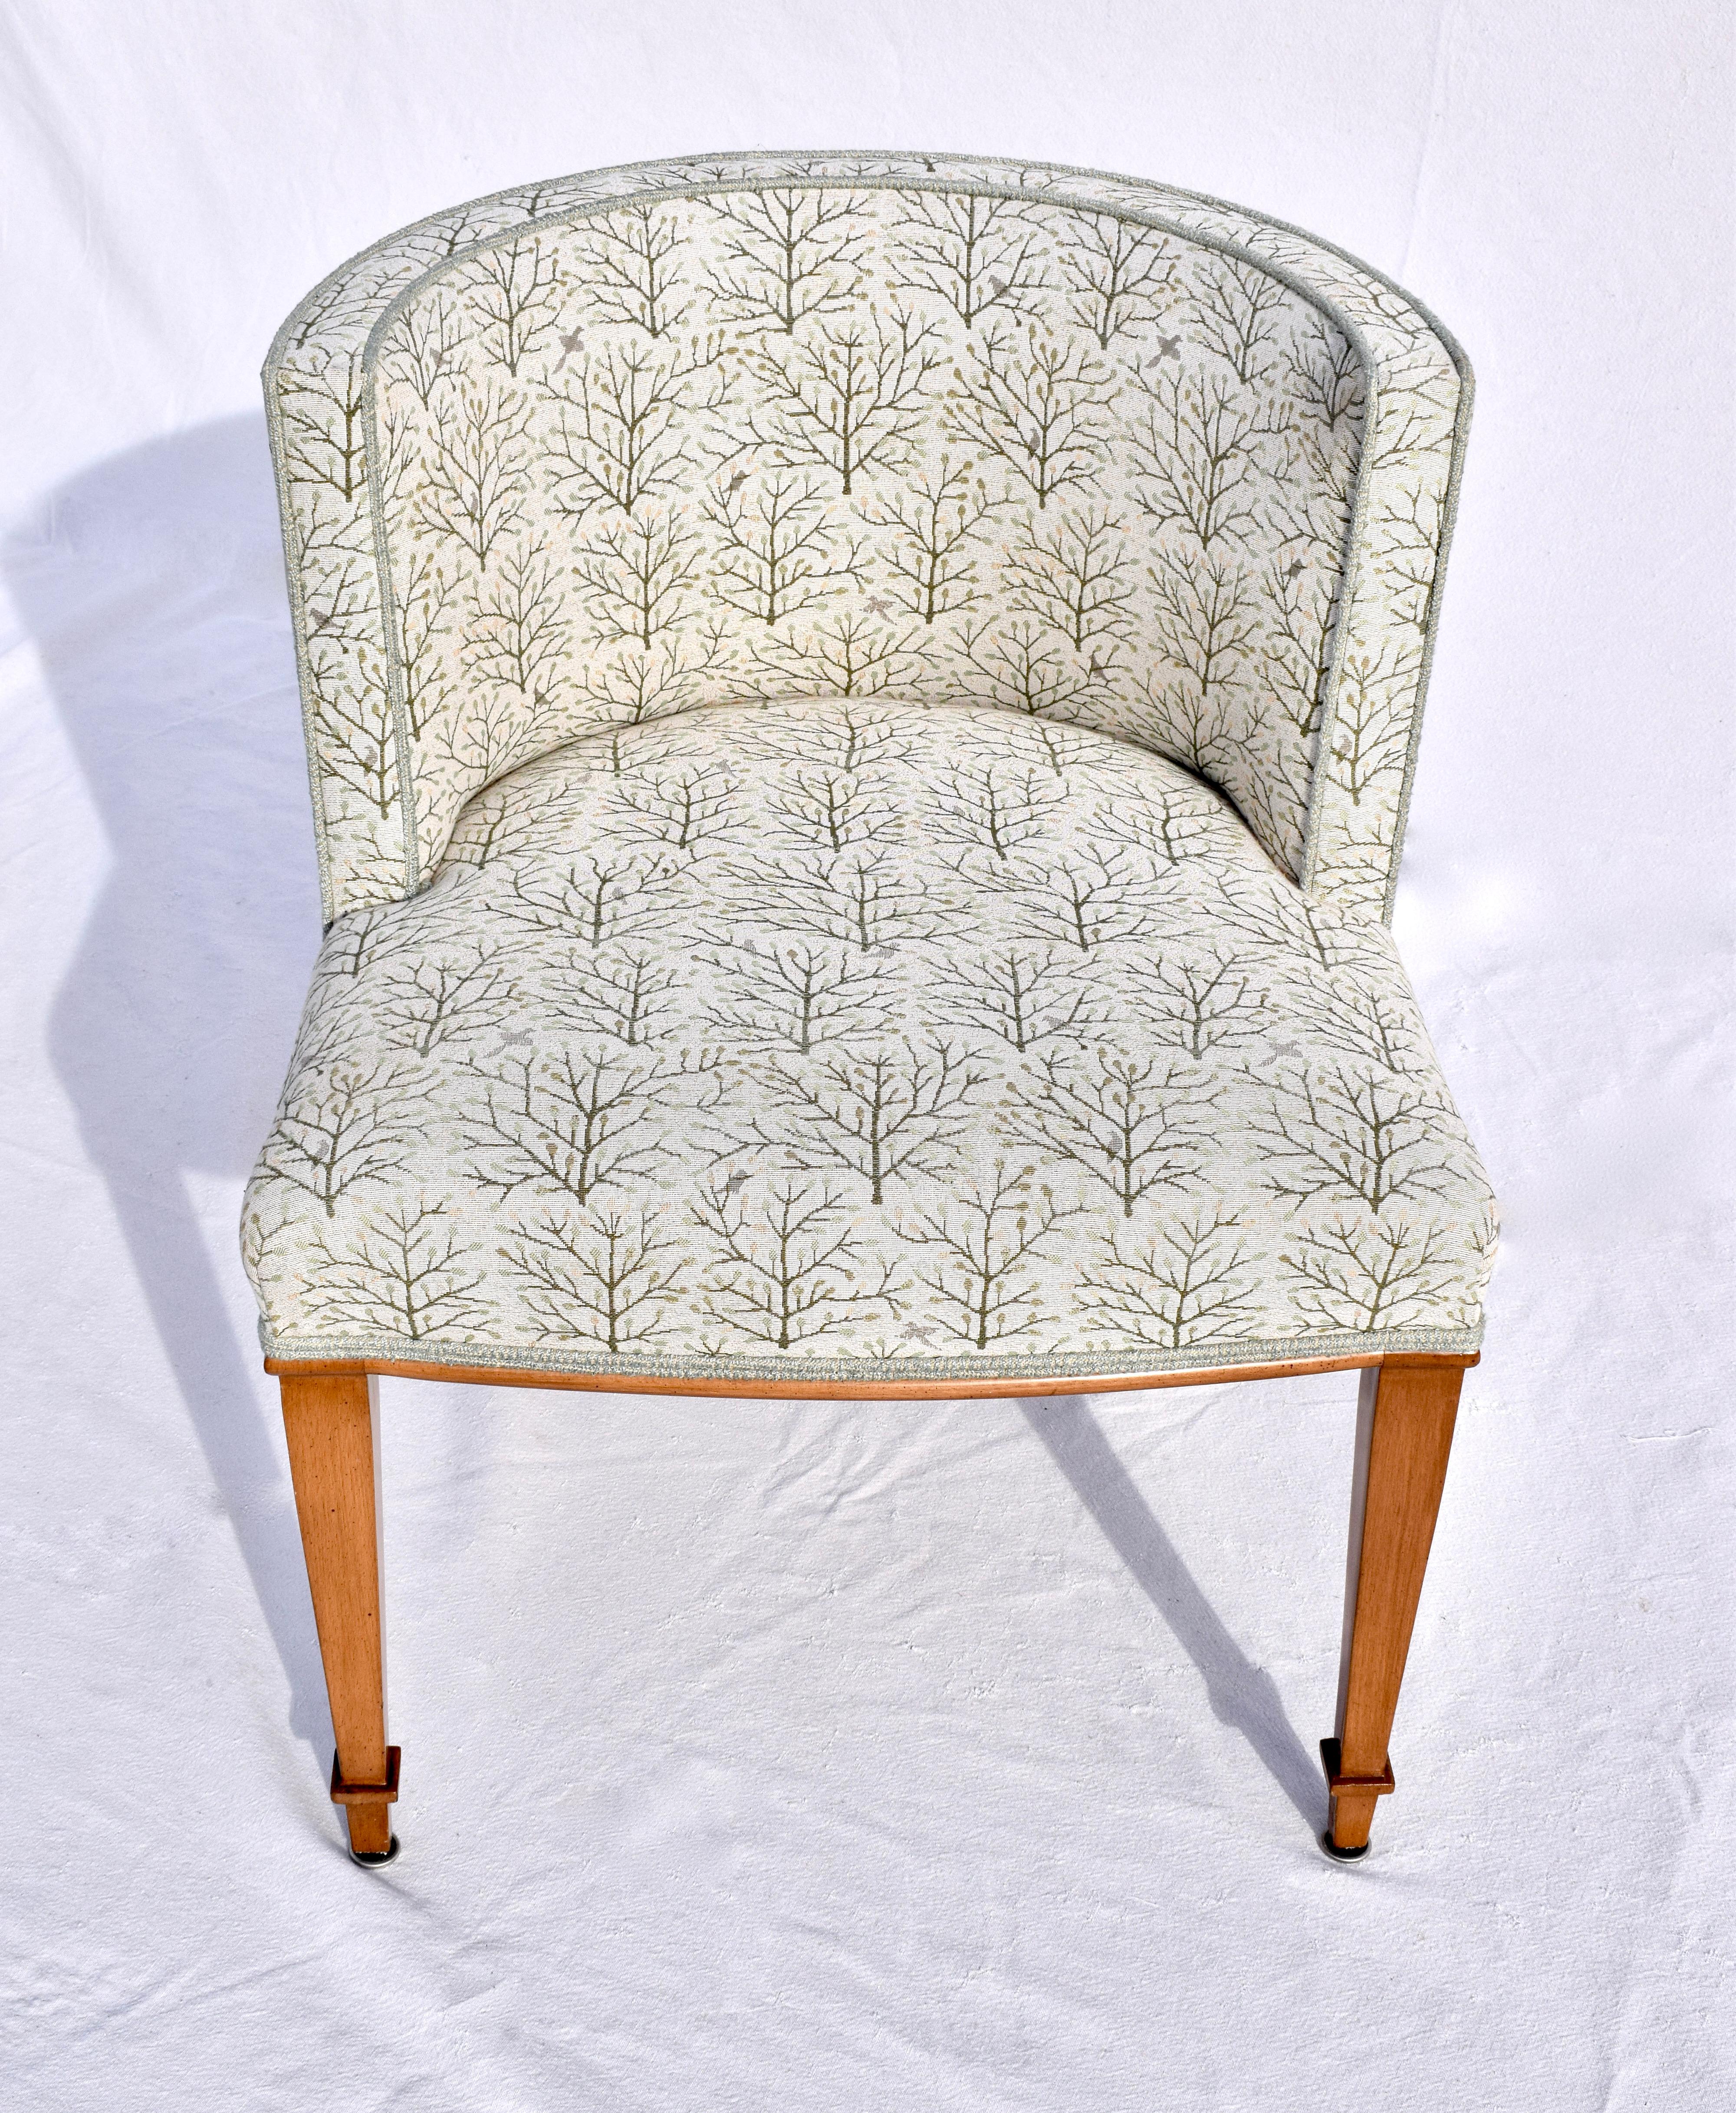 Edward Ferrell Ltd. Modern French style slipper chair with Neoclassical styling to the tapered & spade terminated legs. Suitable for a variety of uses including, side, occasional or desk seating. Pairs beautifully with our French Directoire Style